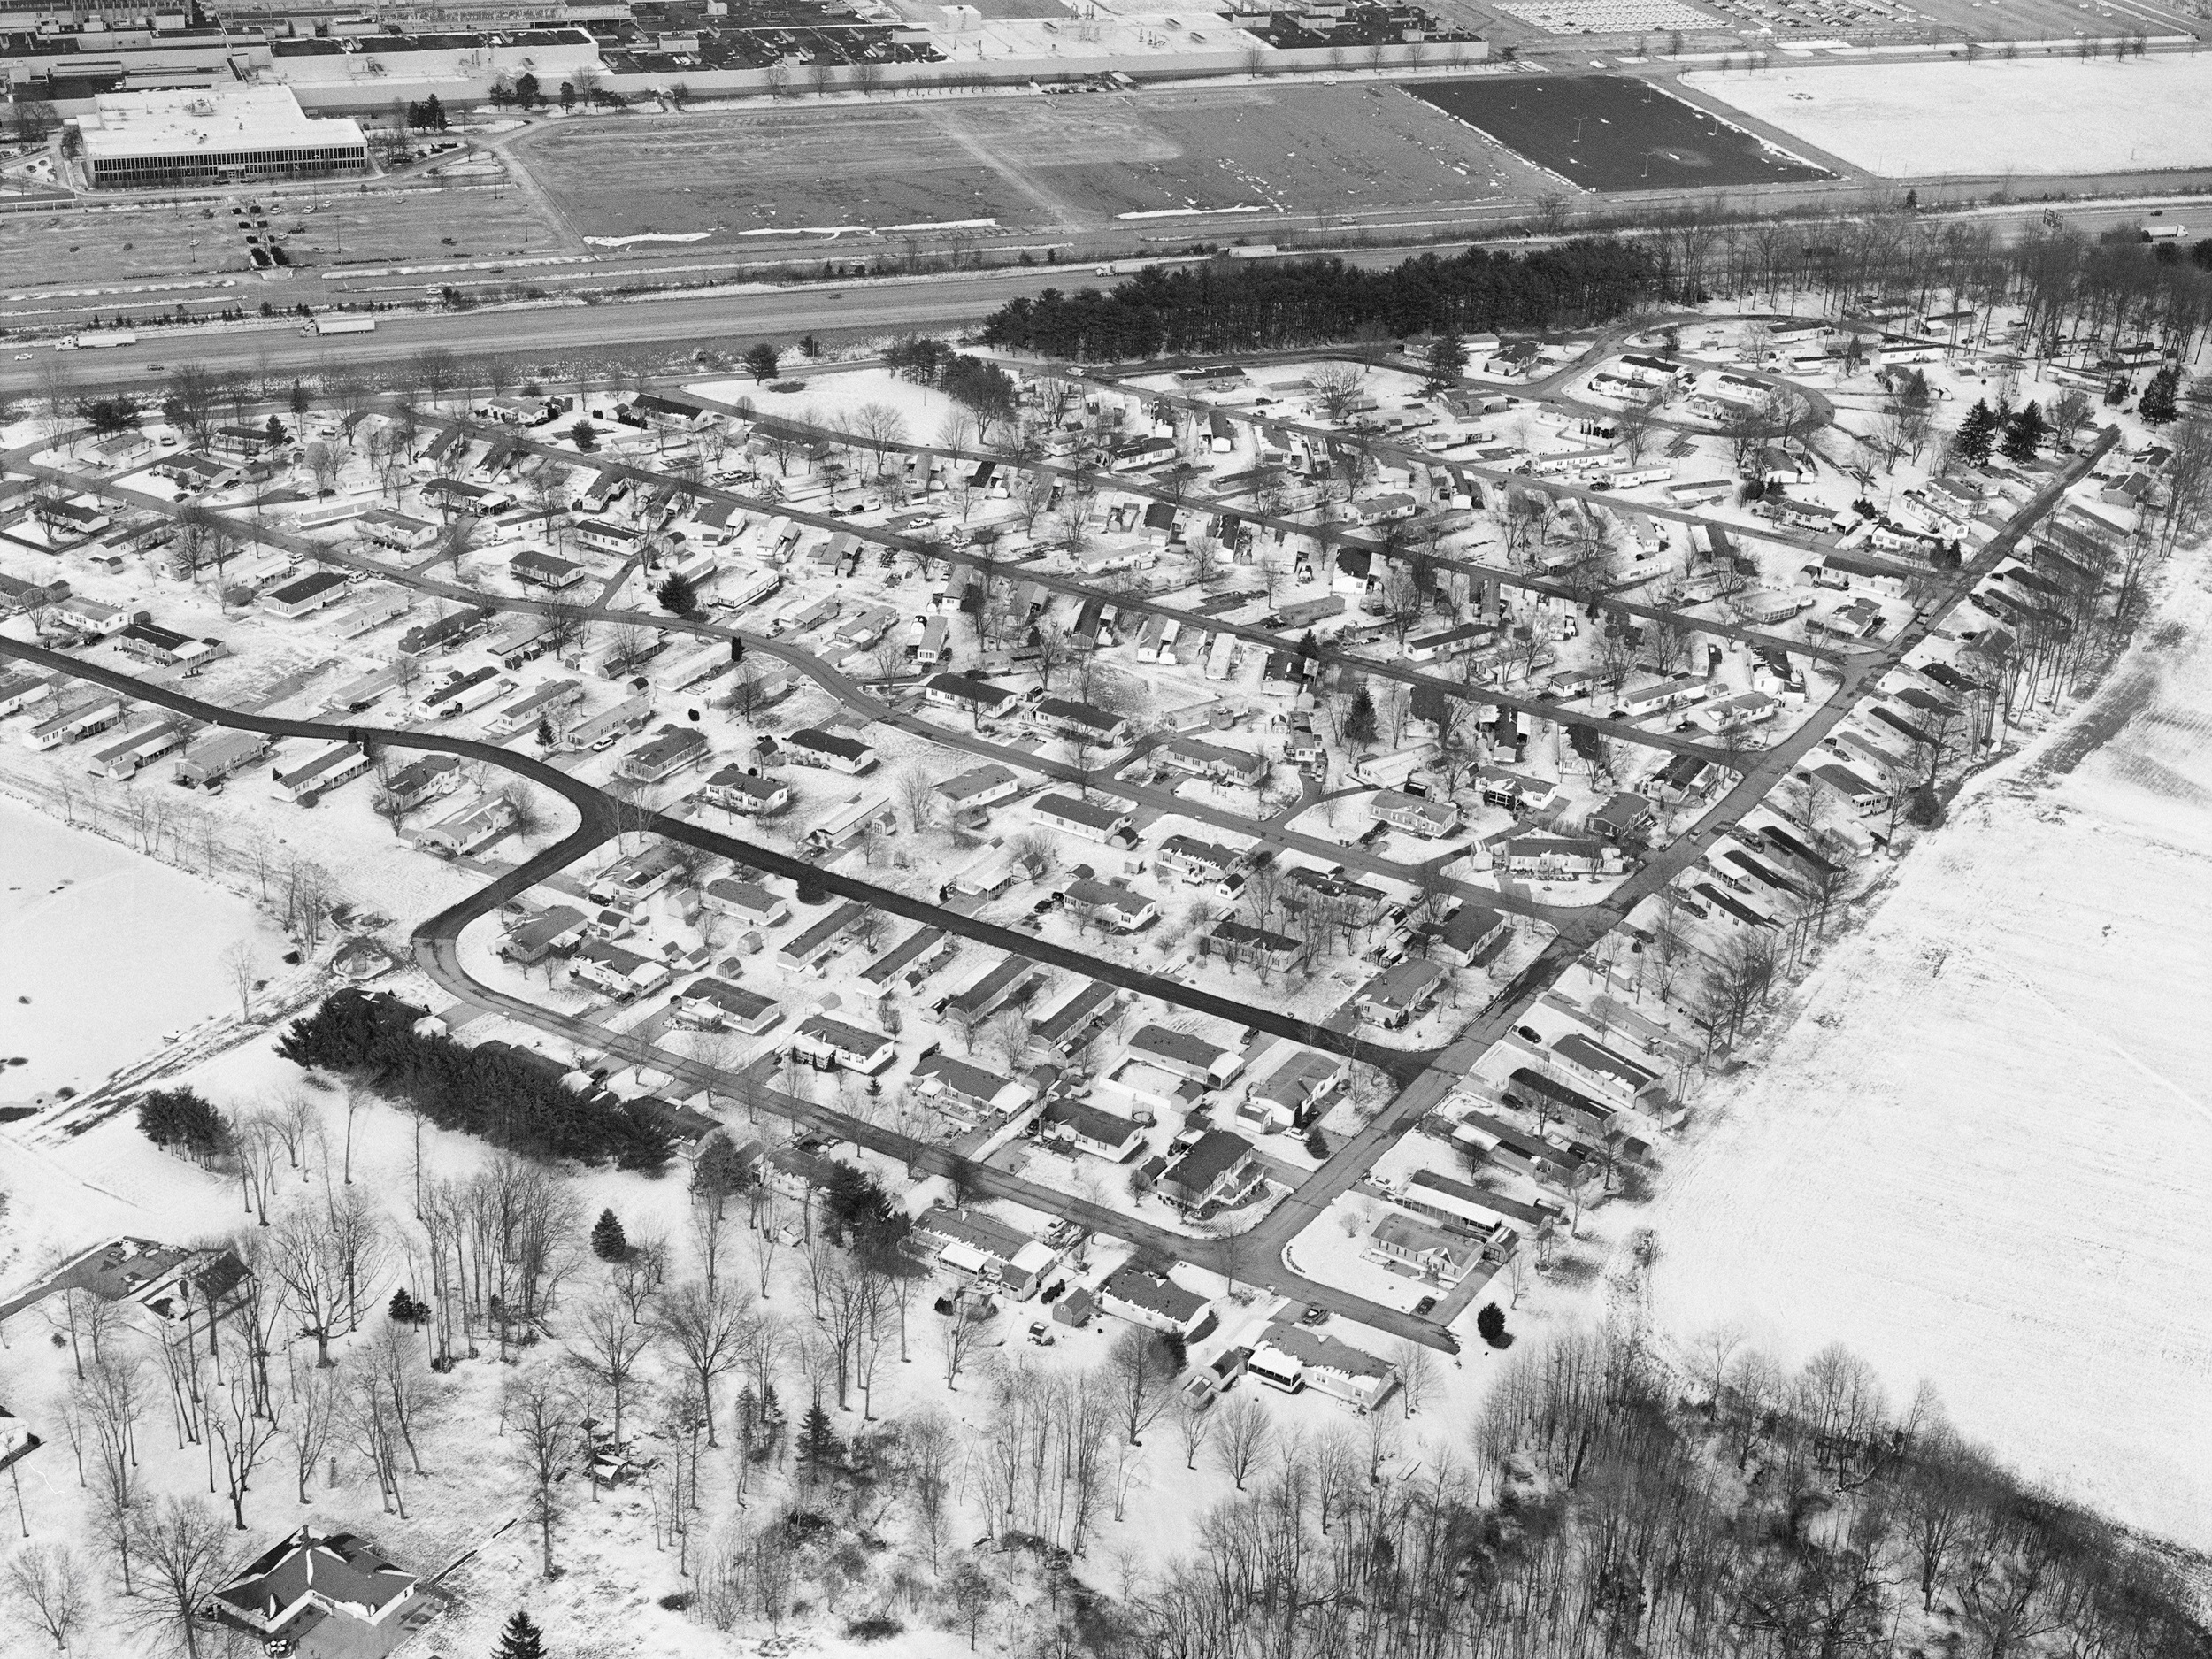 Black-and-white aerial photograph of a housing development in winter, across the street from an industrial site